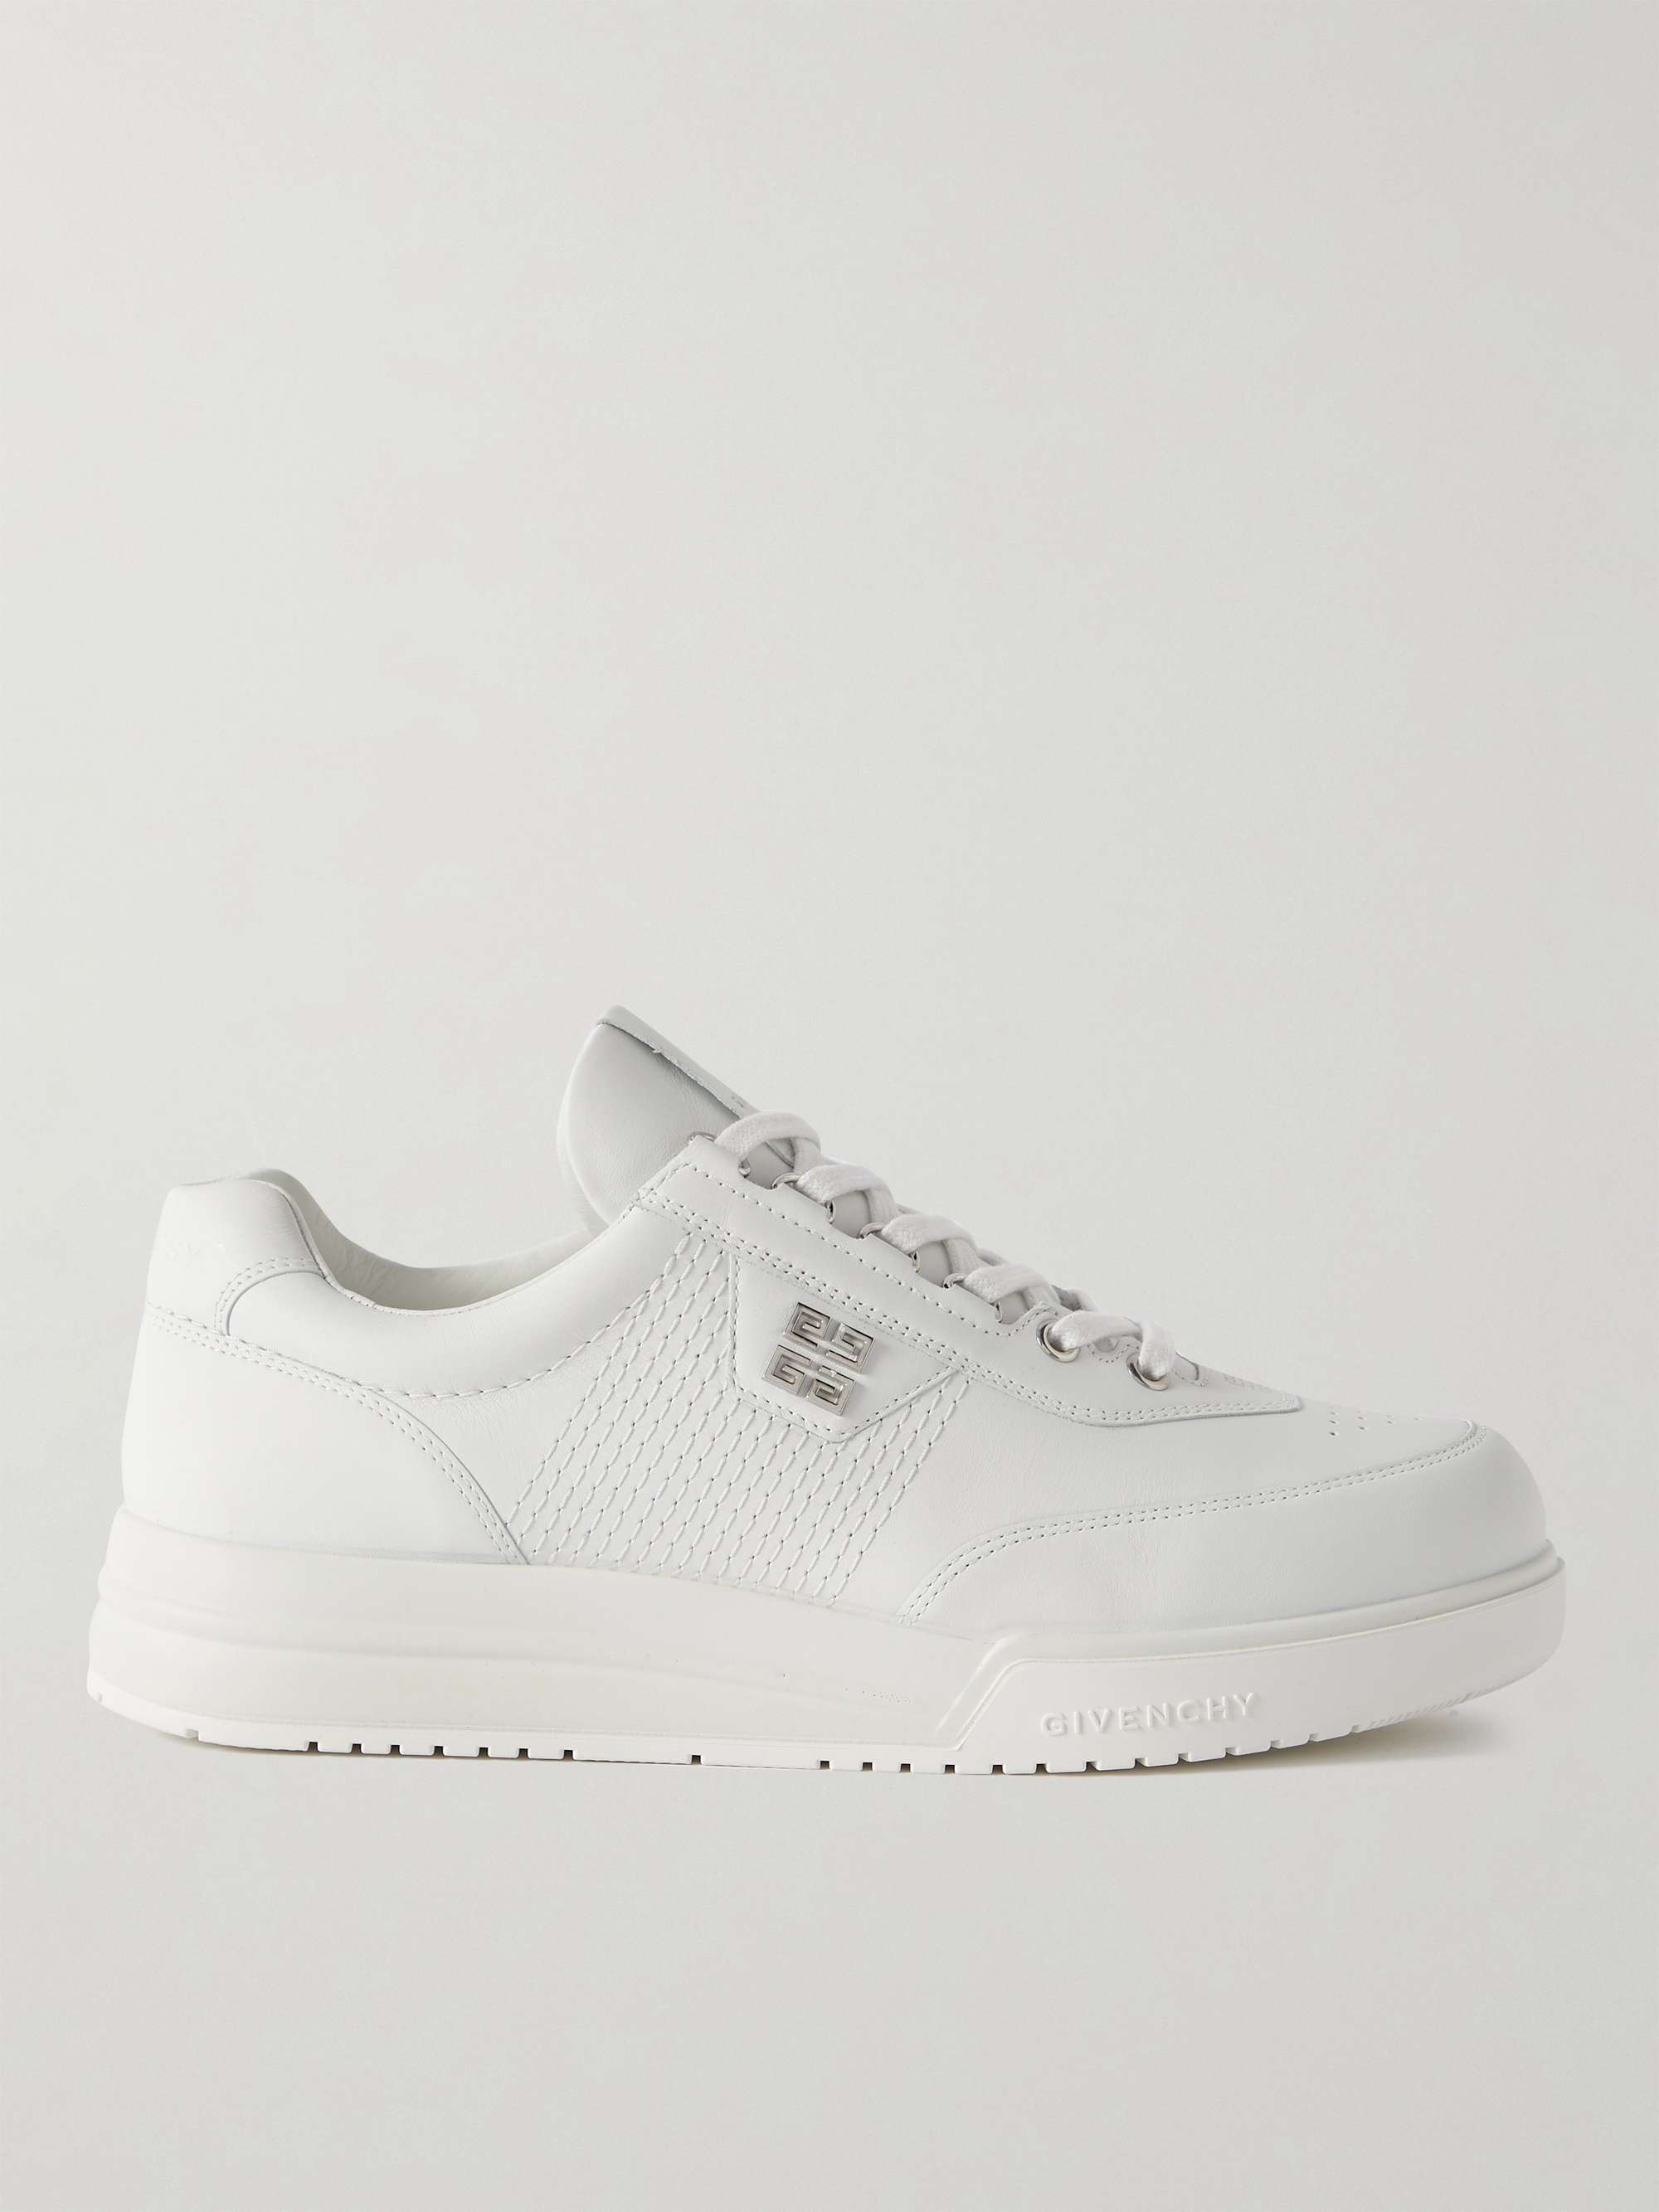 GIVENCHY G-4 Logo-Detailed Leather Sneakers for Men | MR PORTER